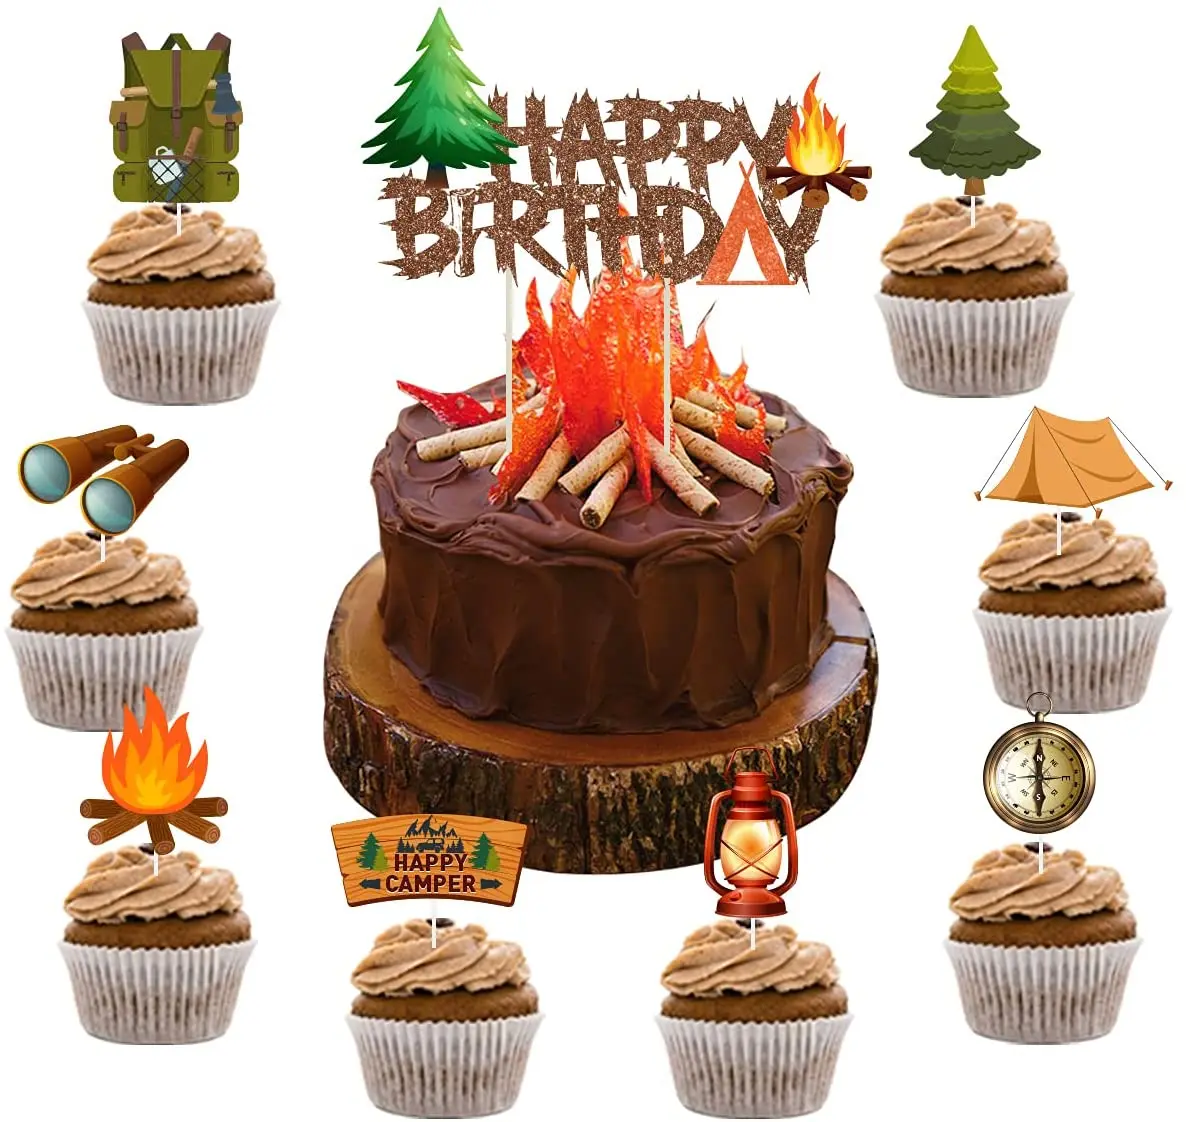 Camping Themed Happy Birthday Cake Topper 24 Pack Cupcake Picks Flashlight Campfire for Camping Birthday Party Decorations